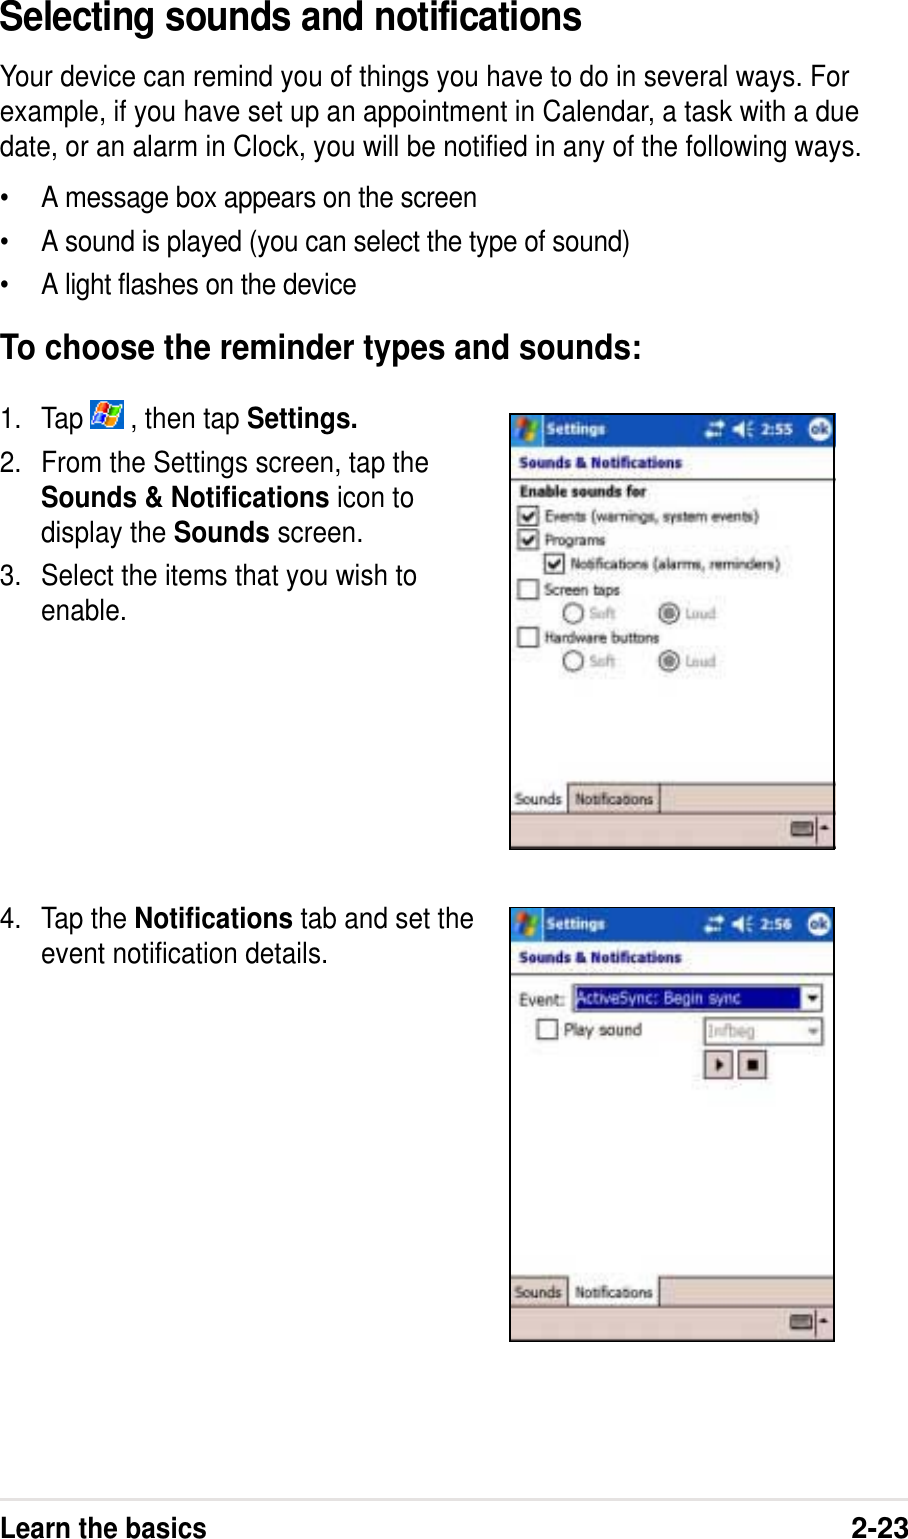 Learn the basics2-23Selecting sounds and notificationsYour device can remind you of things you have to do in several ways. Forexample, if you have set up an appointment in Calendar, a task with a duedate, or an alarm in Clock, you will be notified in any of the following ways.• A message box appears on the screen• A sound is played (you can select the type of sound)• A light flashes on the deviceTo choose the reminder types and sounds:1. Tap   , then tap Settings.2. From the Settings screen, tap theSounds &amp; Notifications icon todisplay the Sounds screen.3. Select the items that you wish toenable.4. Tap the Notifications tab and set theevent notification details.